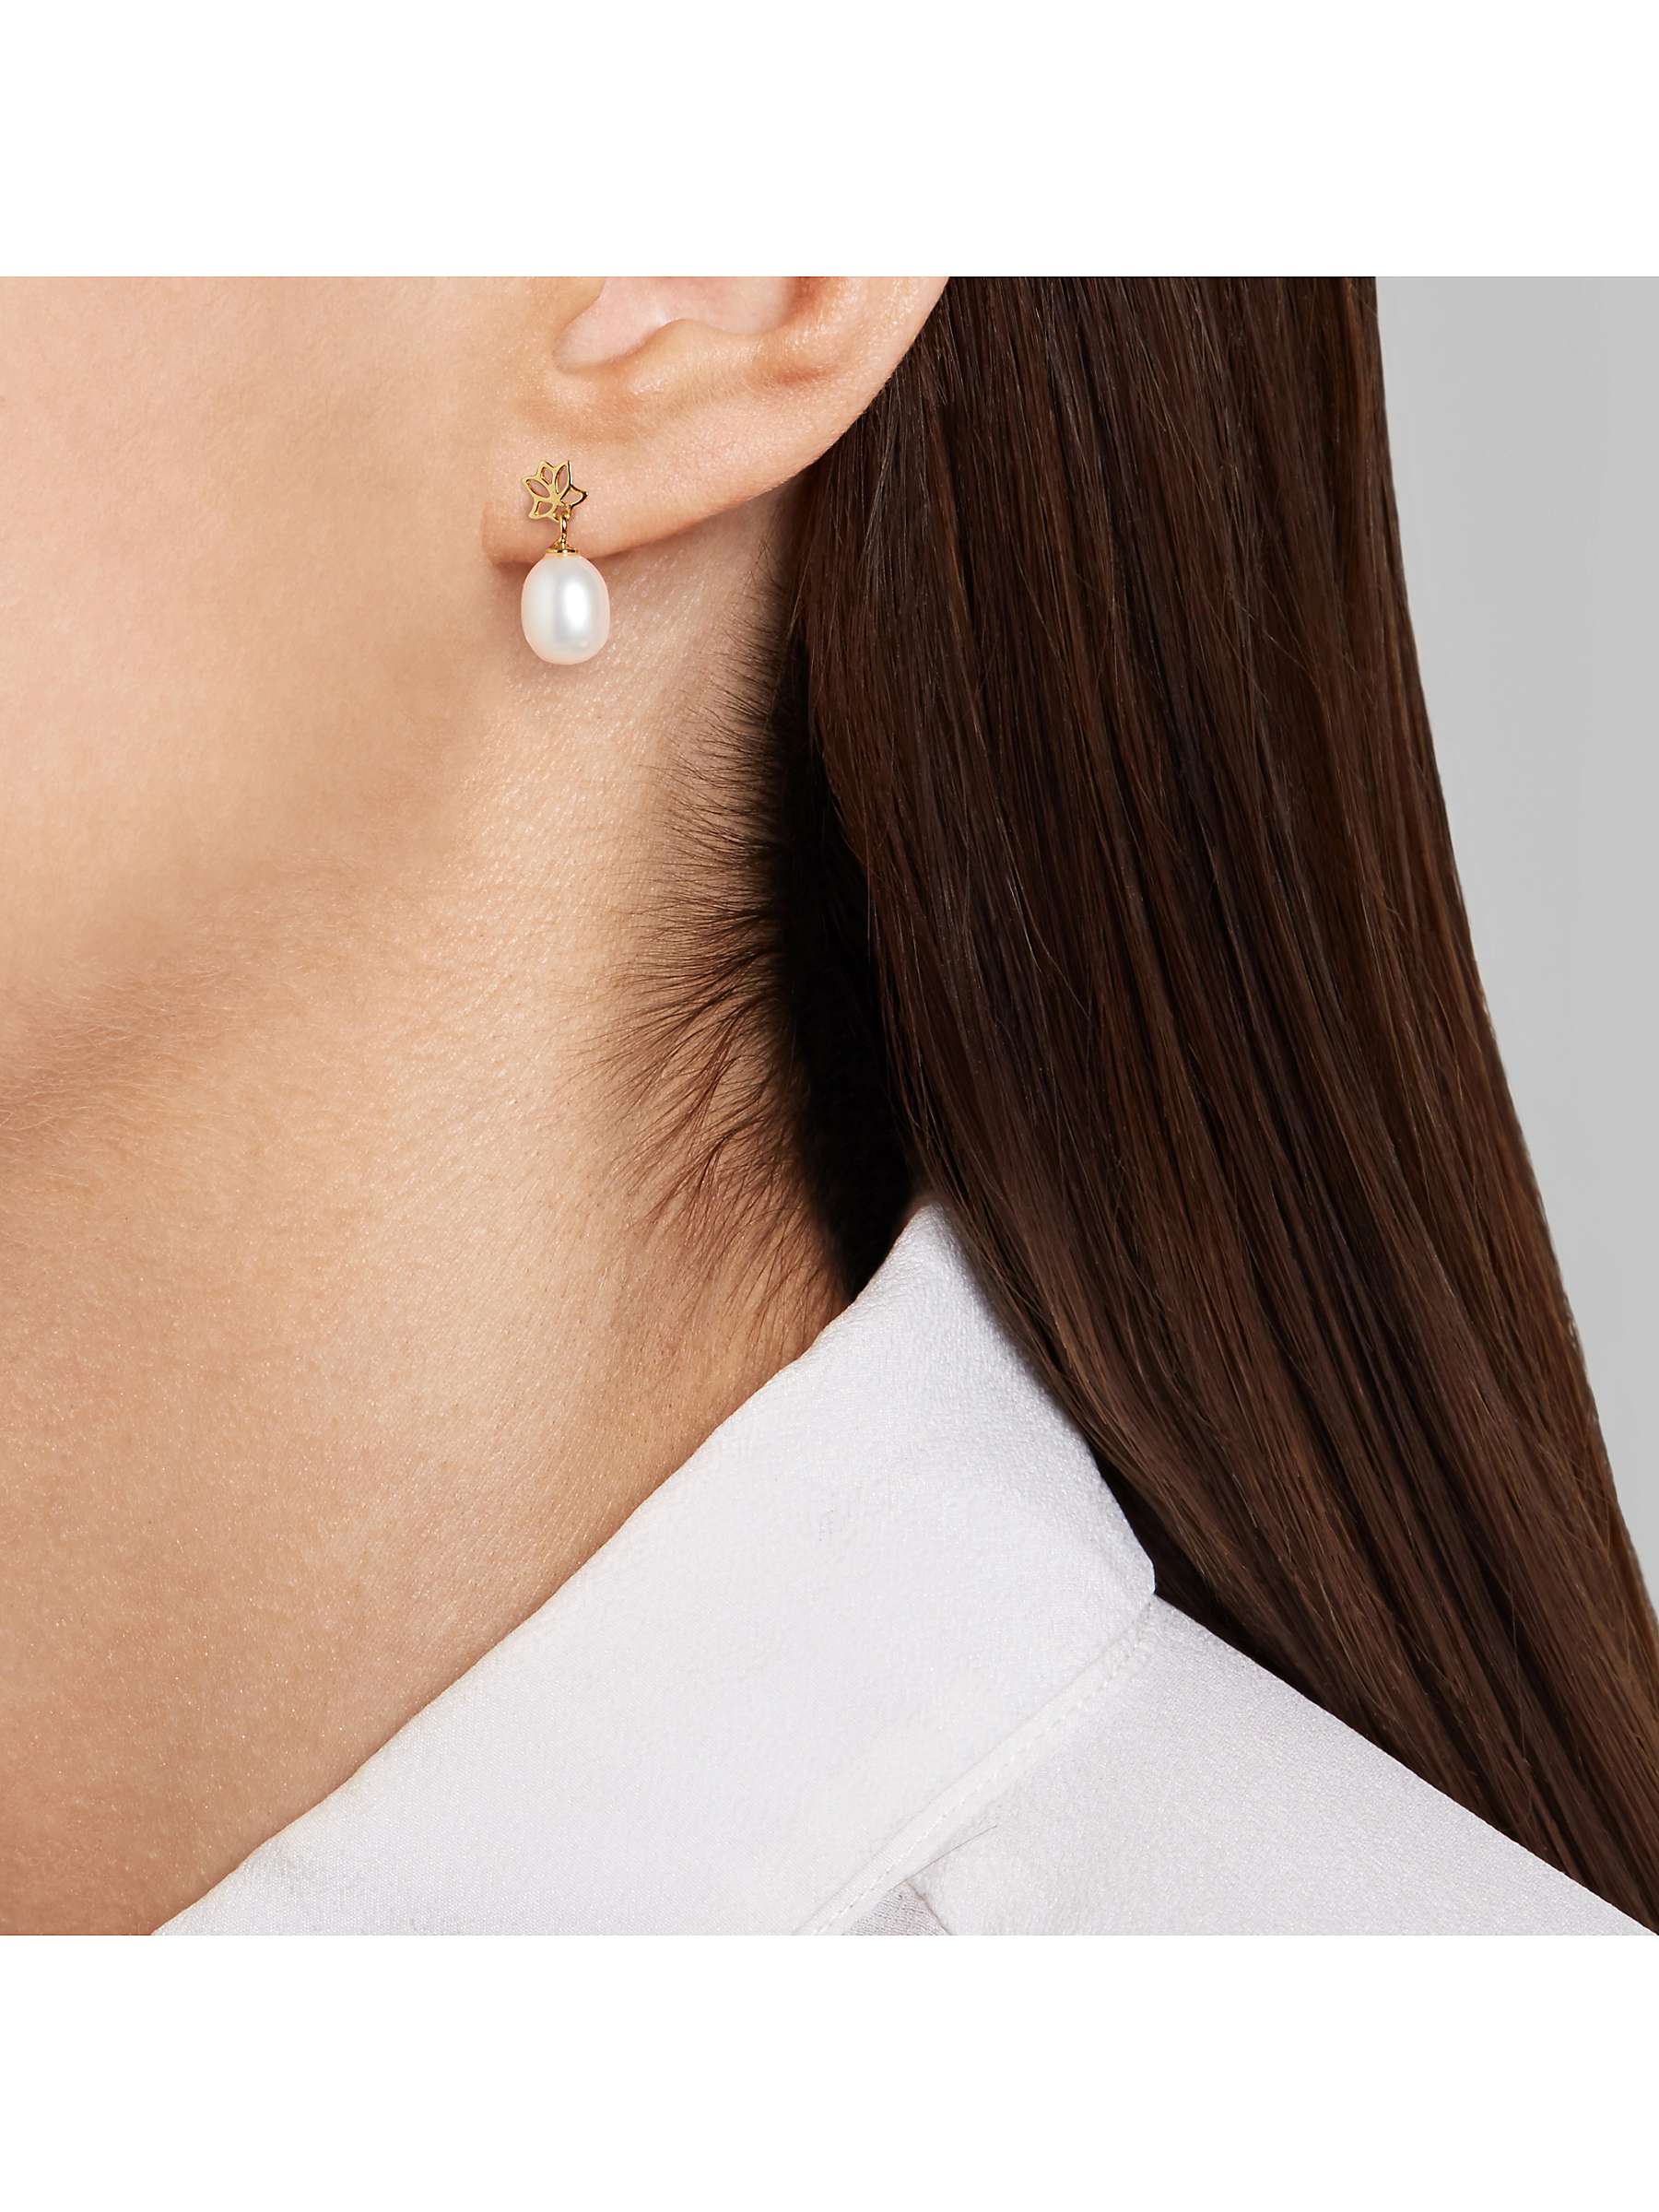 Buy A B Davis 9ct Gold Freshwater Pearl Drop Earrings, White Online at johnlewis.com